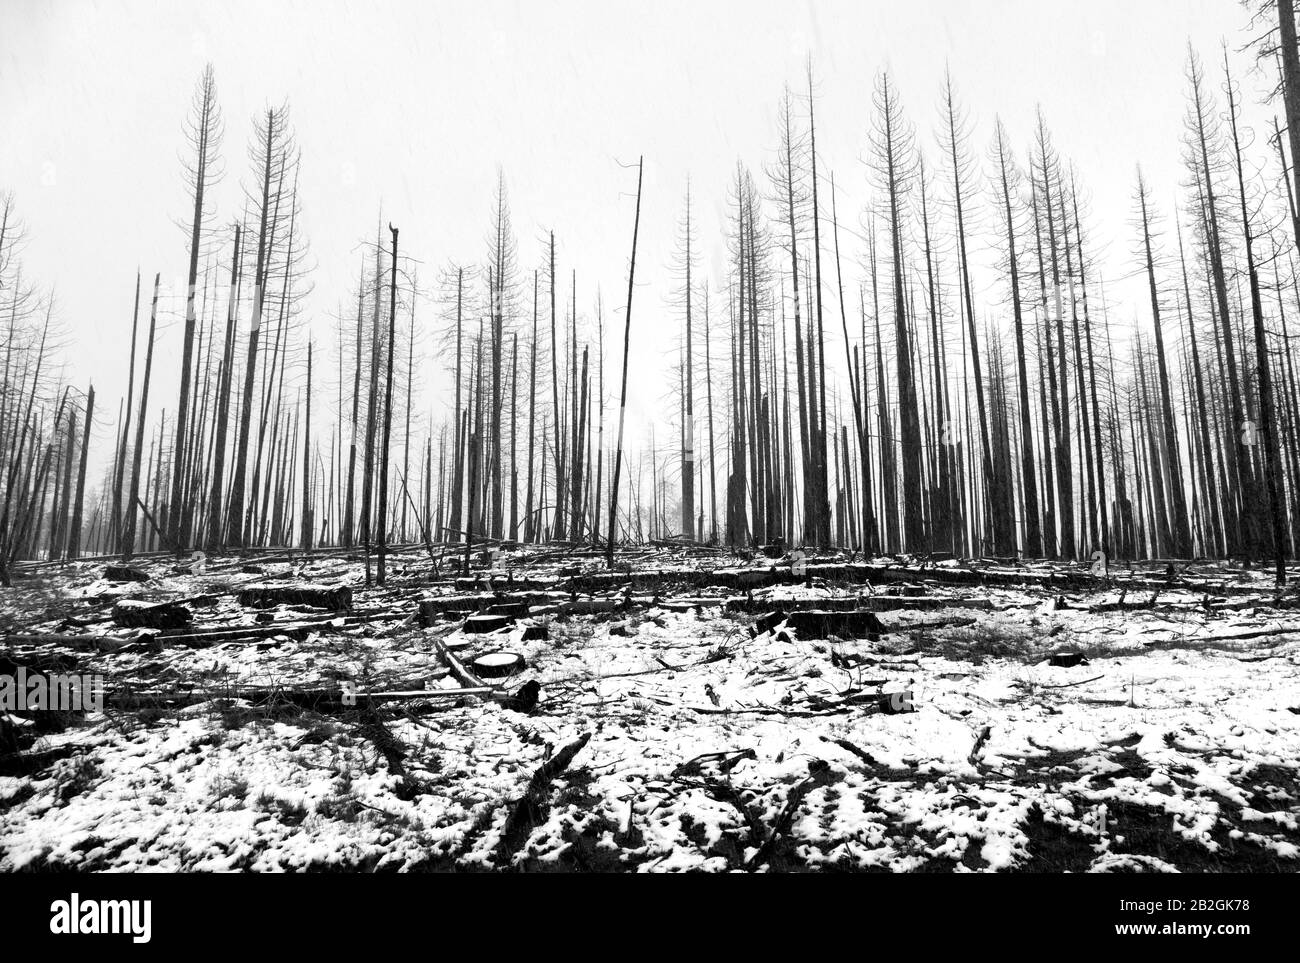 Burnt trees in the aftermath of forest fires at Yosemite, Sierra Mountains, California, USA. Stock Photo